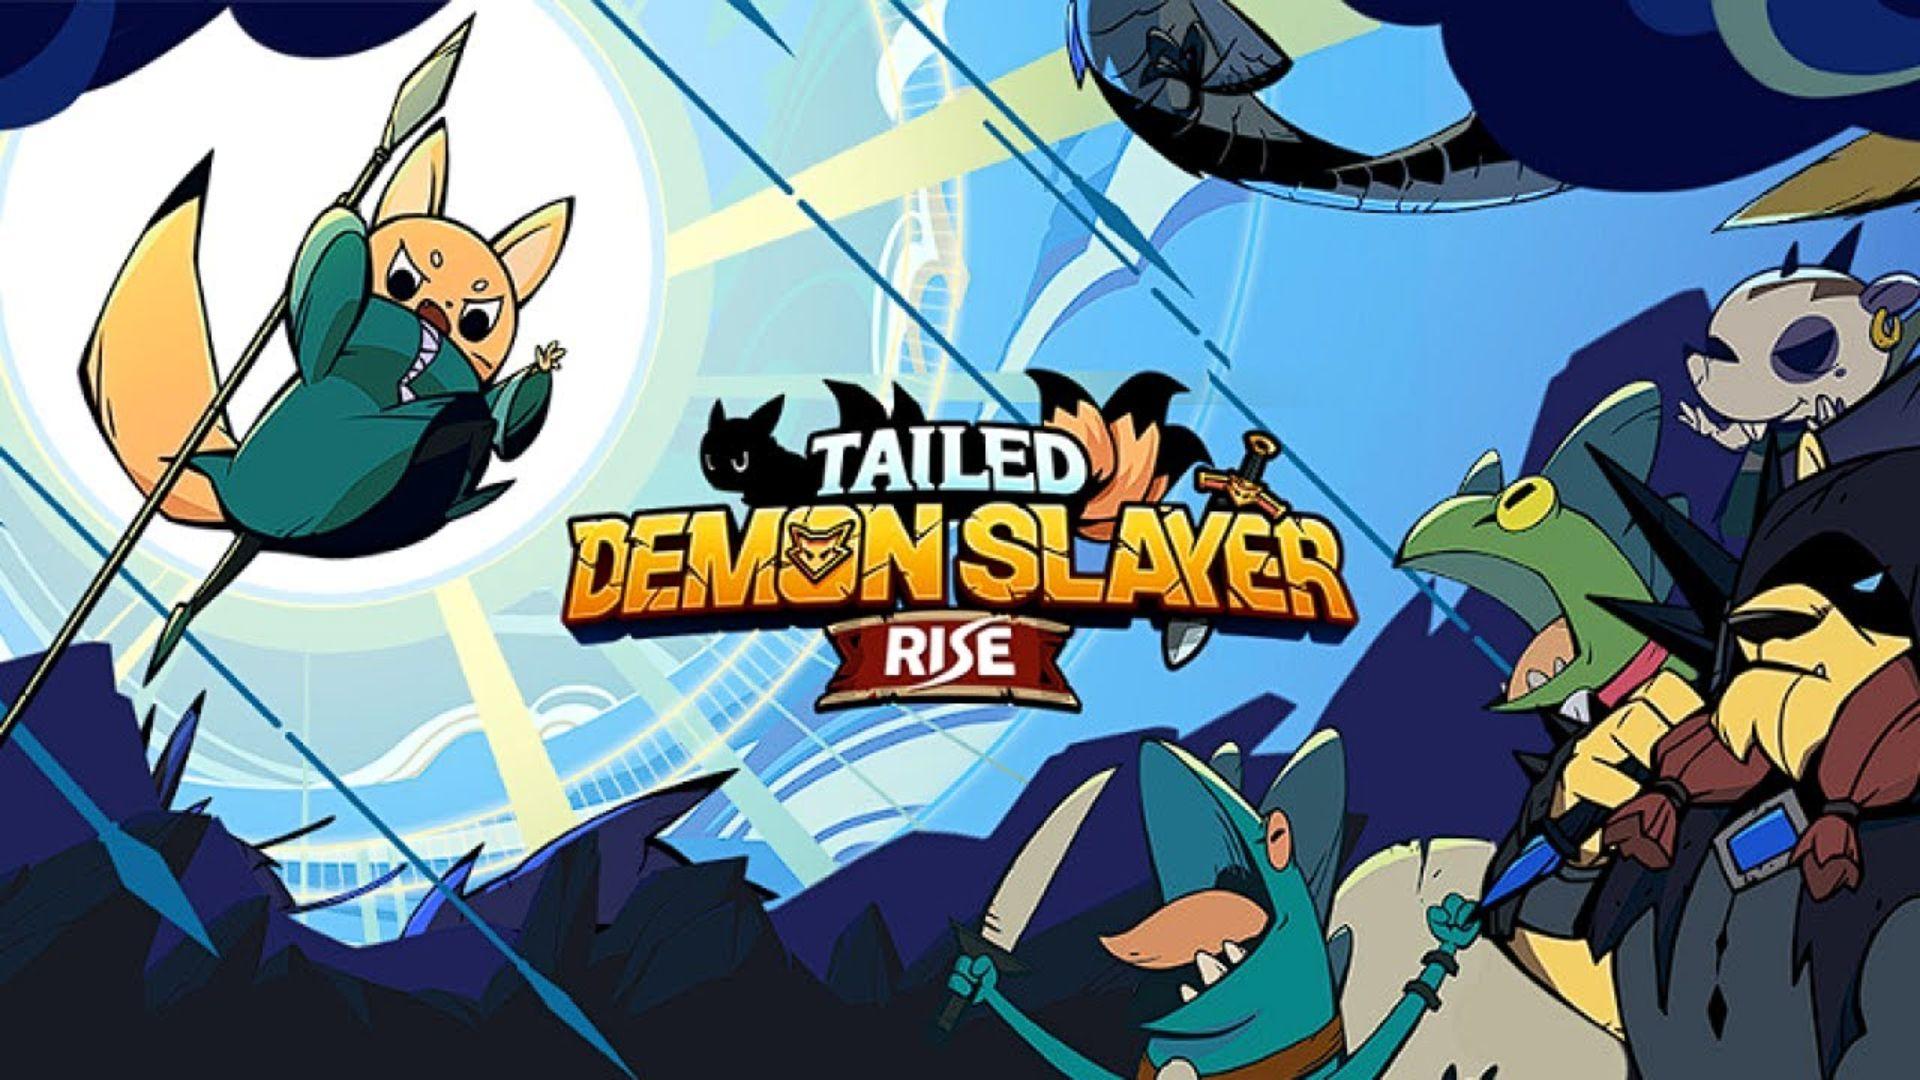 Tailed Demon Slayer: RISE Codes to Advance Fast In The Gameplay